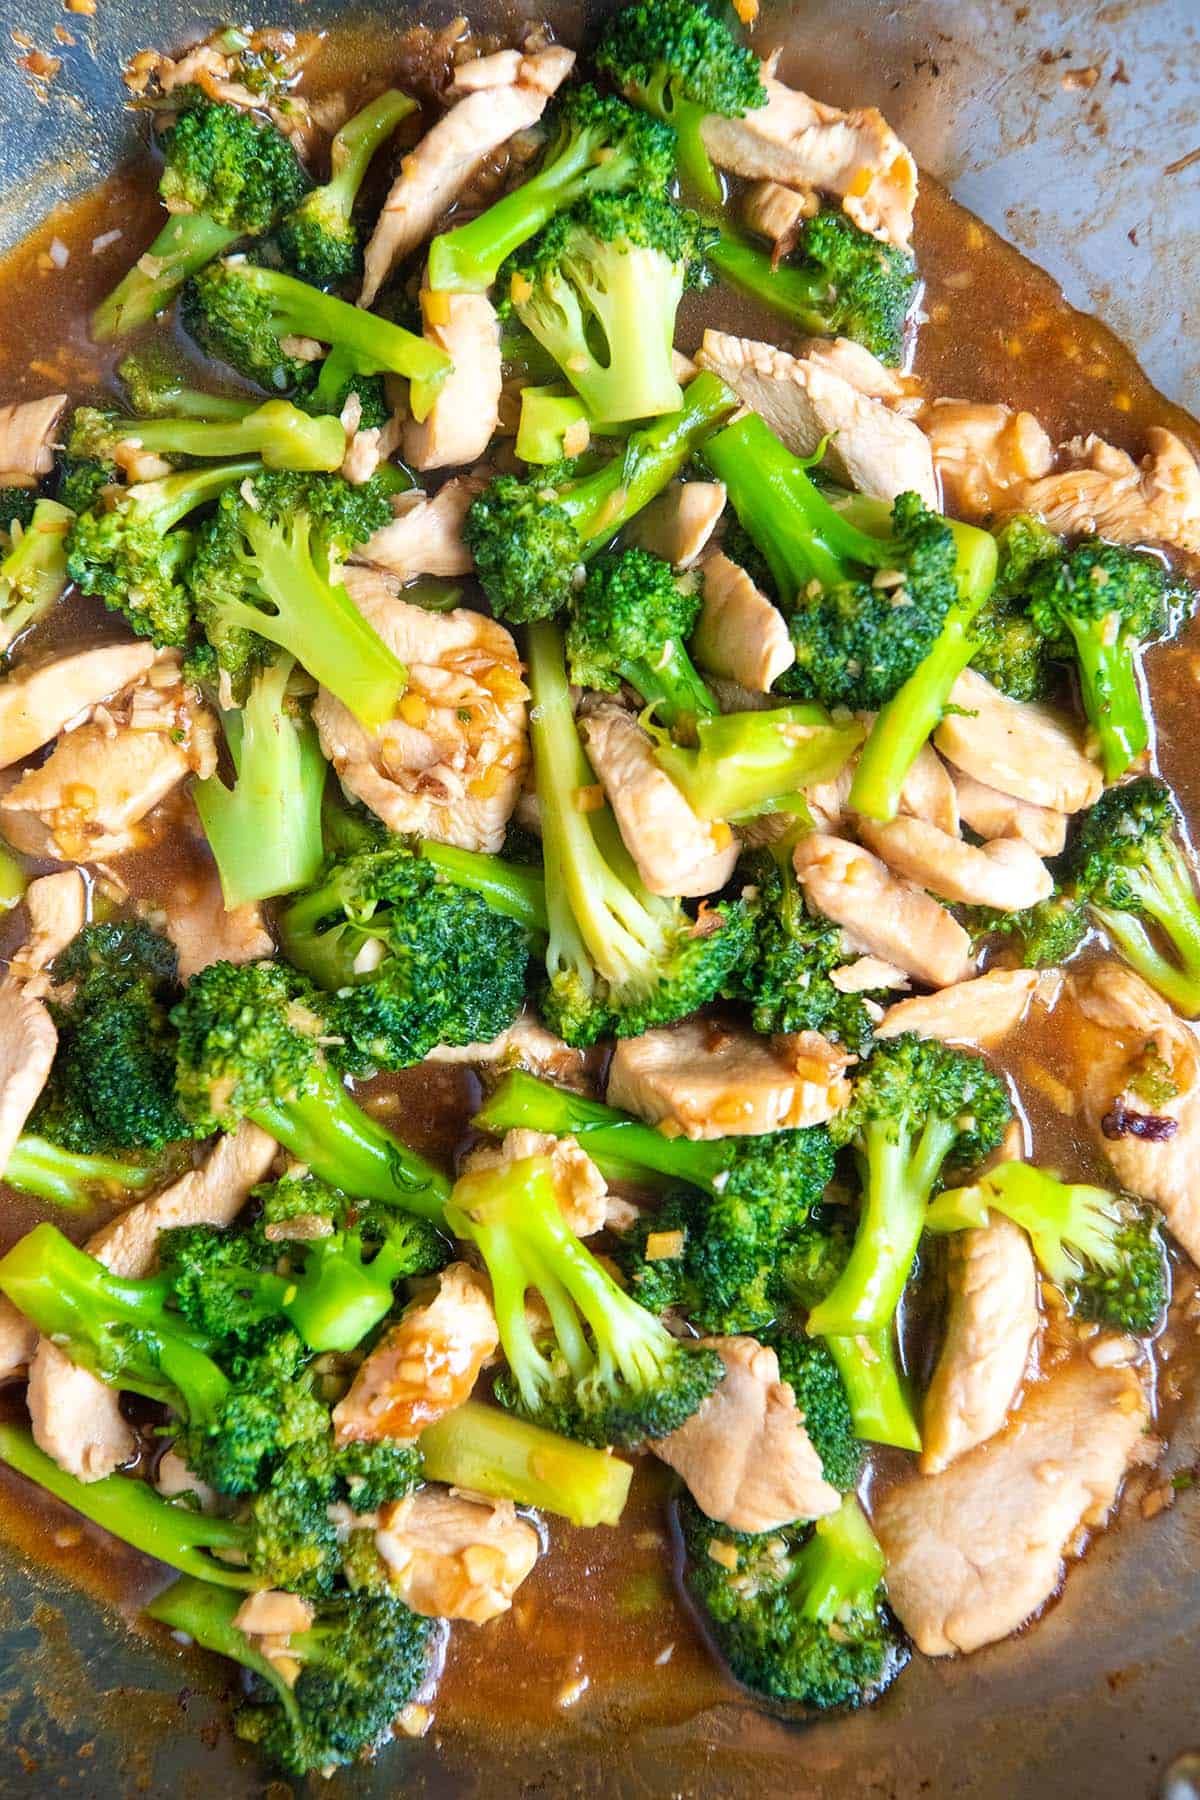 Chicken and Broccoli Stir Fry in a Wok